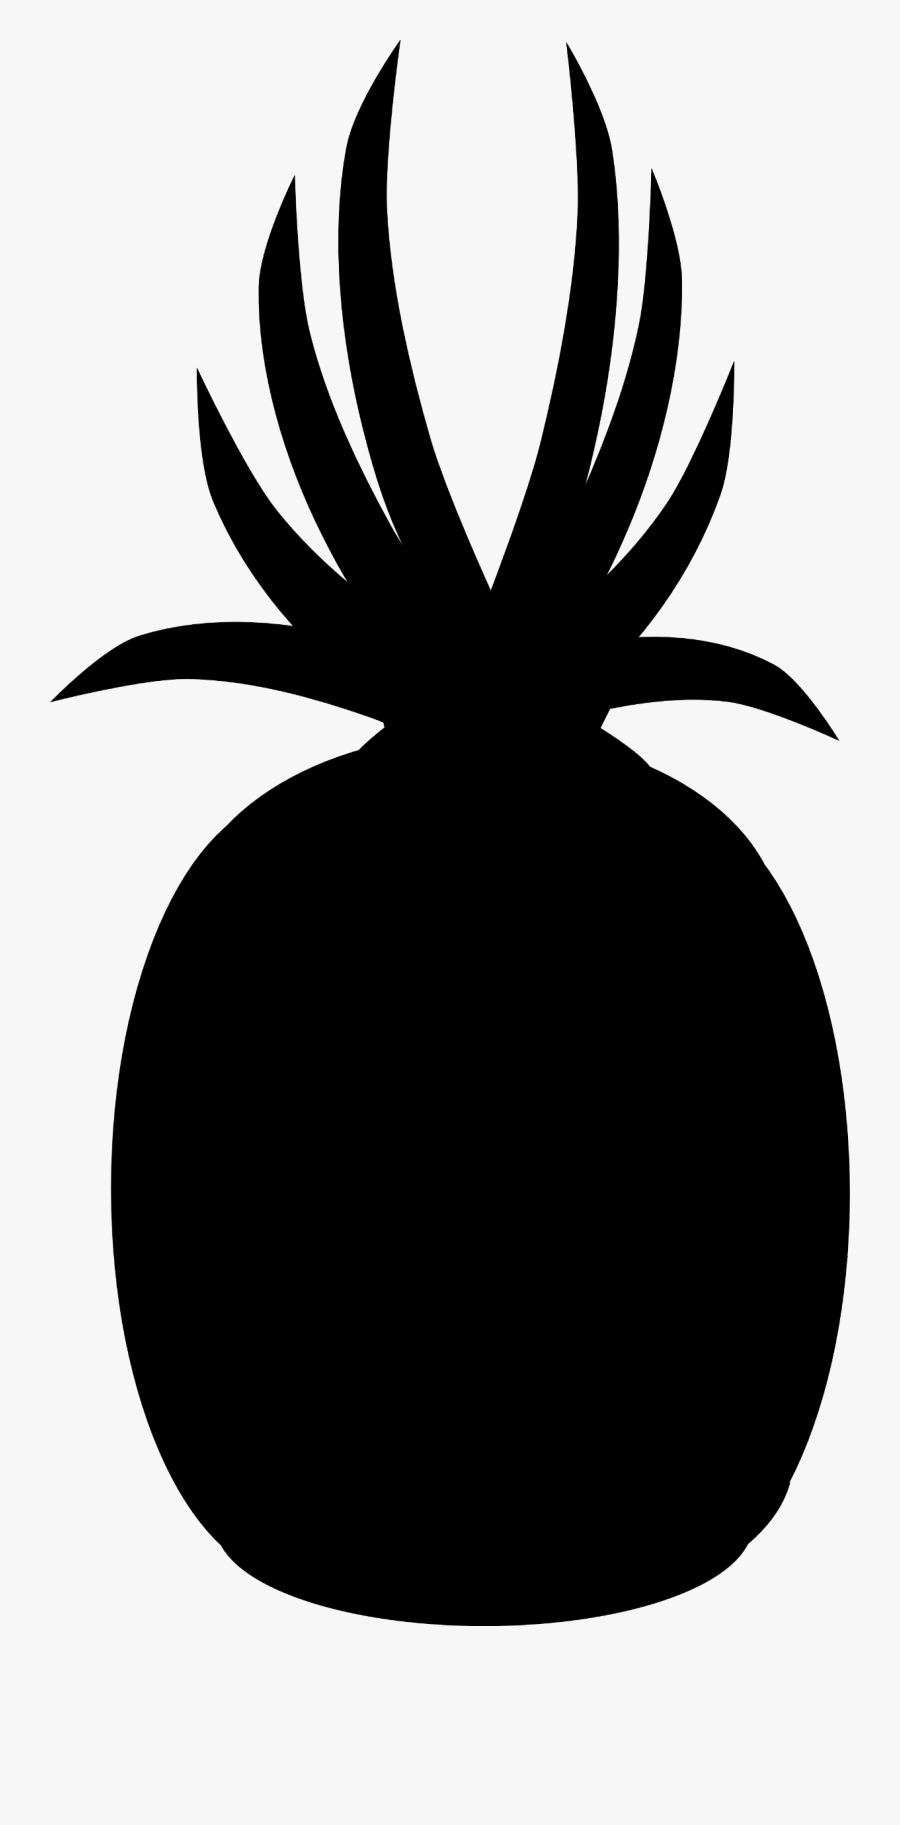 Pineapple - Silhouette - Pineapple, Transparent Clipart